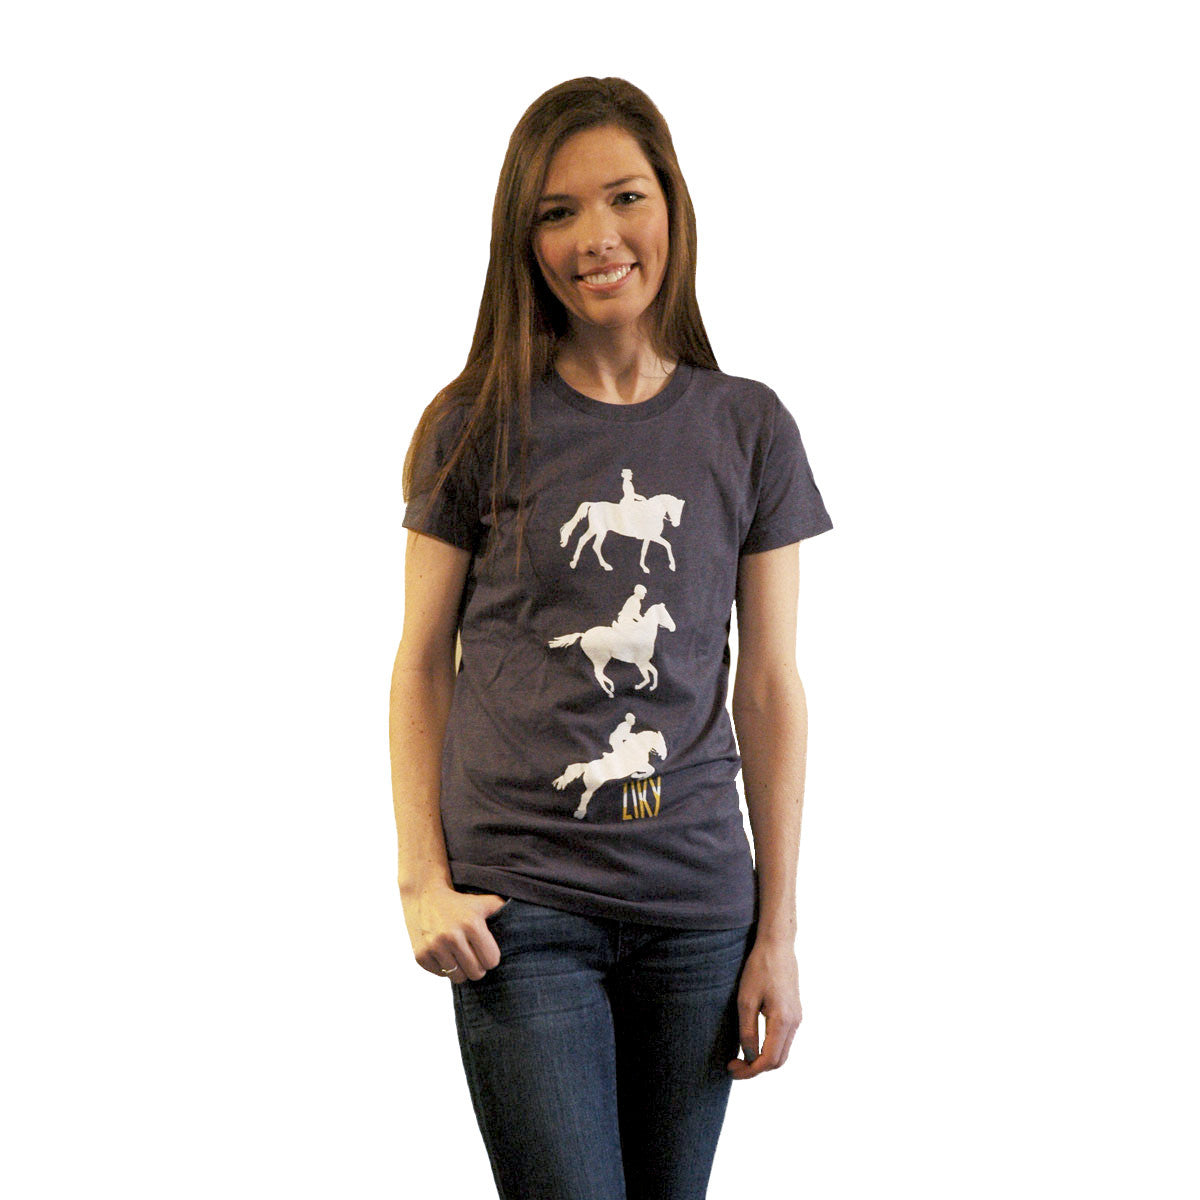 Blue horse shirt by ZIKY